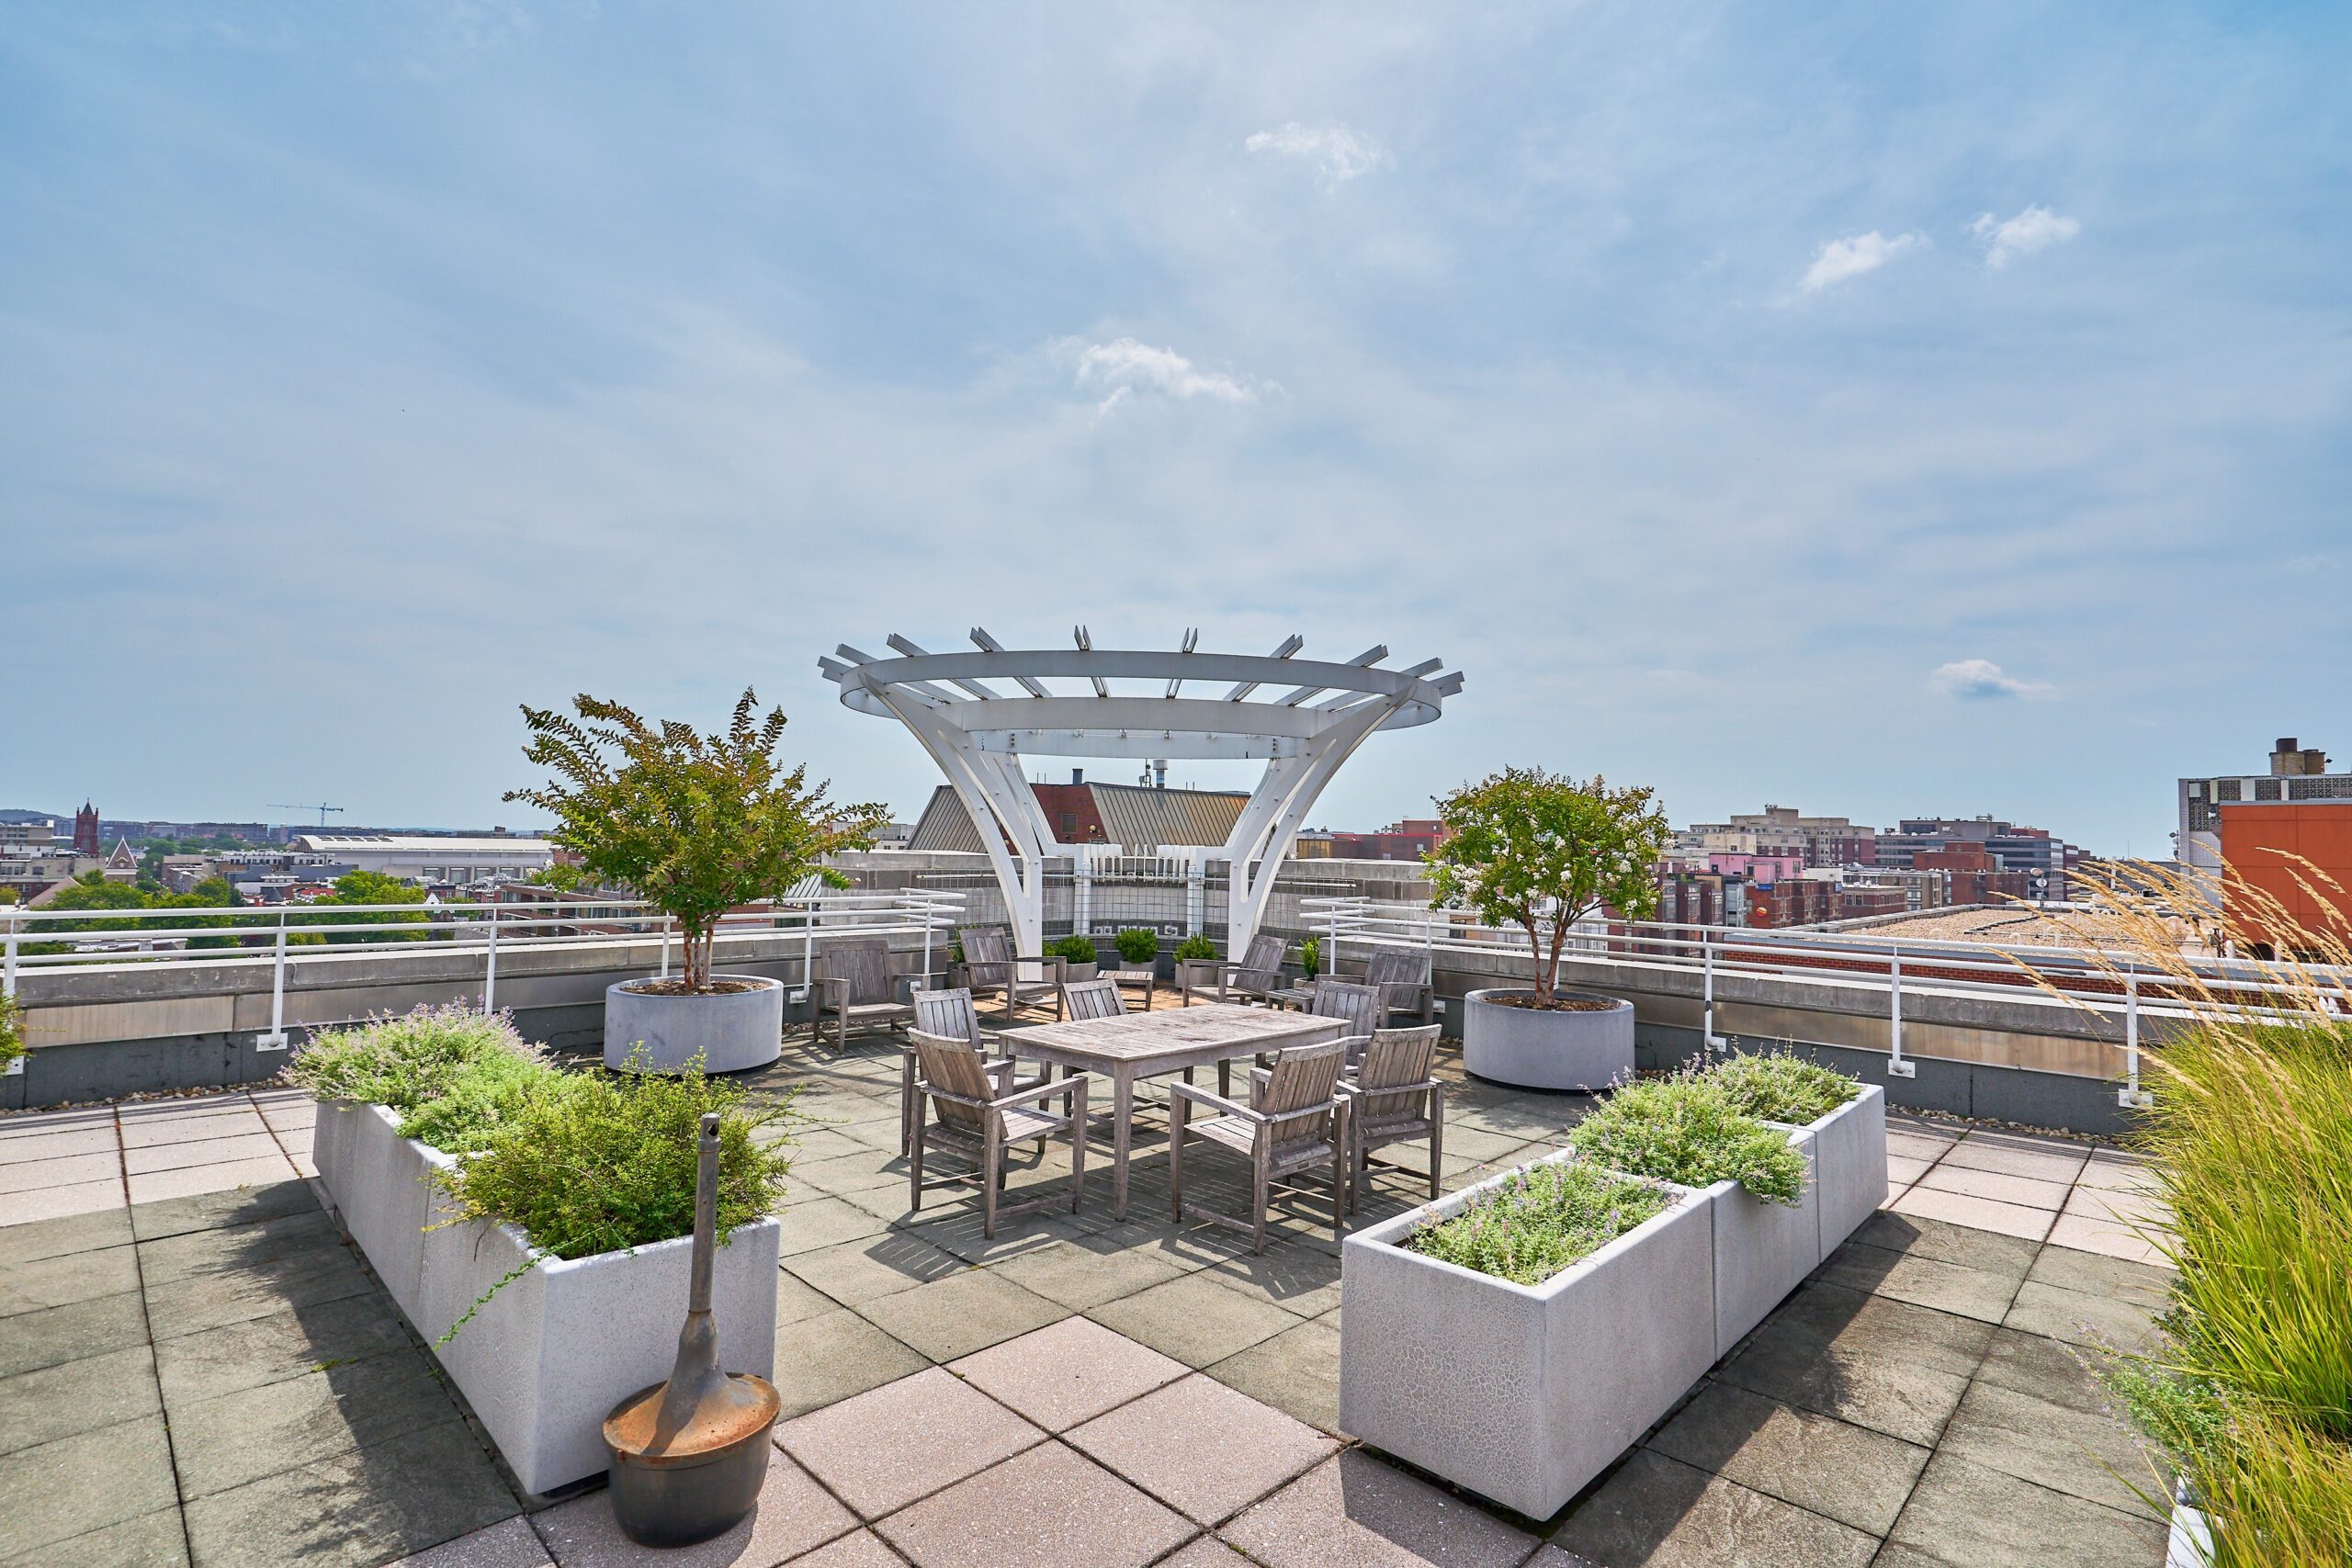 Professional exterior photo of 1300 13th St NW #102, Washington DC - showing the rooftop terrace